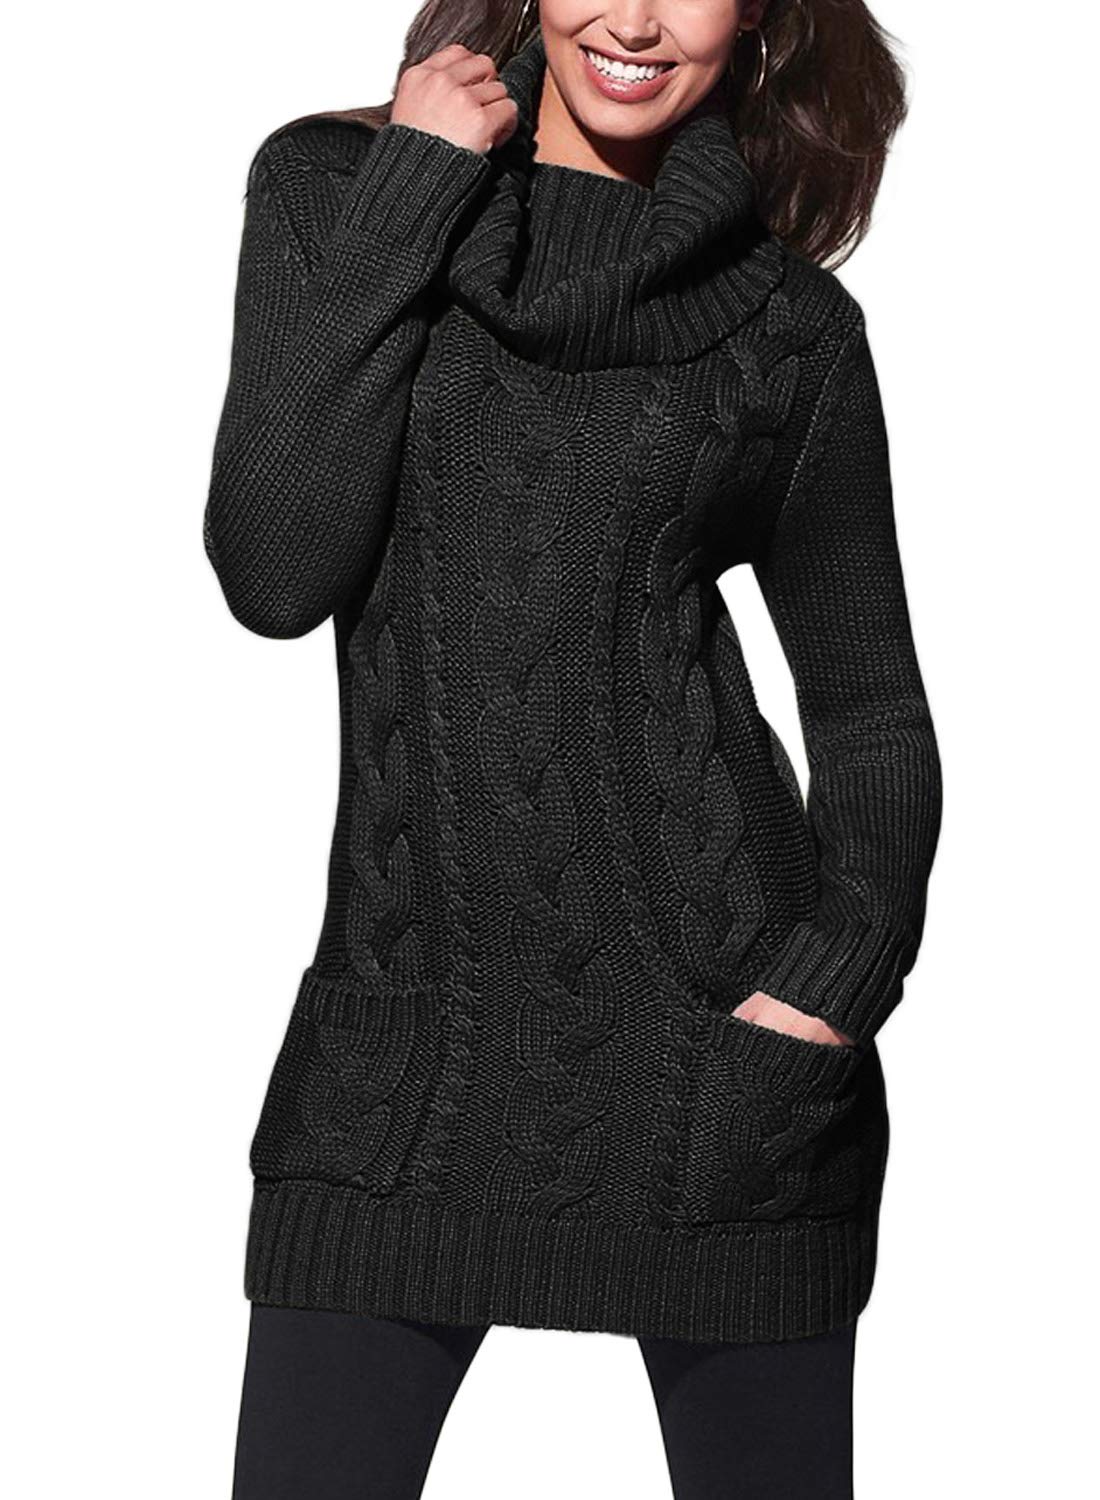 BLENCOT Womens Plus Size Winter Pullover Sweaters Cowl Neck Ribbed Cable Knit Black Long Sweaters Dresses Jumper Fashion XL